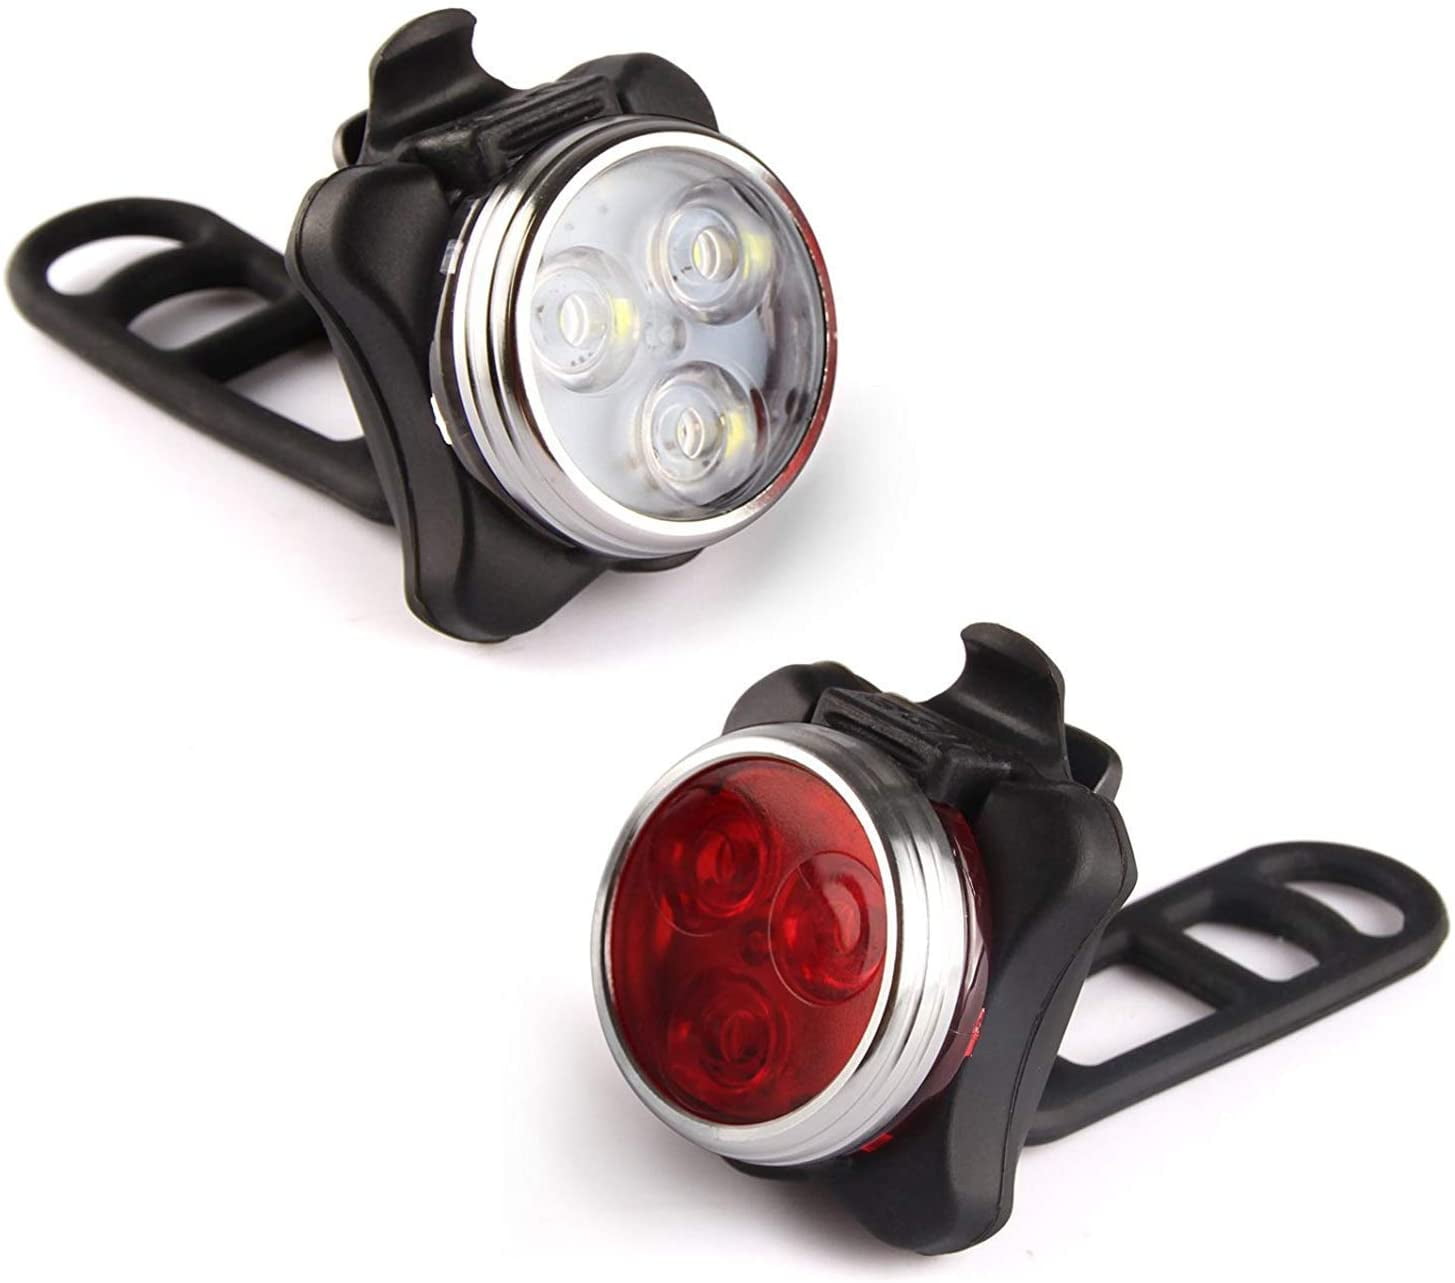 Rechargeable Bike Lights LED Bicycle Headlight Taillight Set 4 Mode Super Bright 